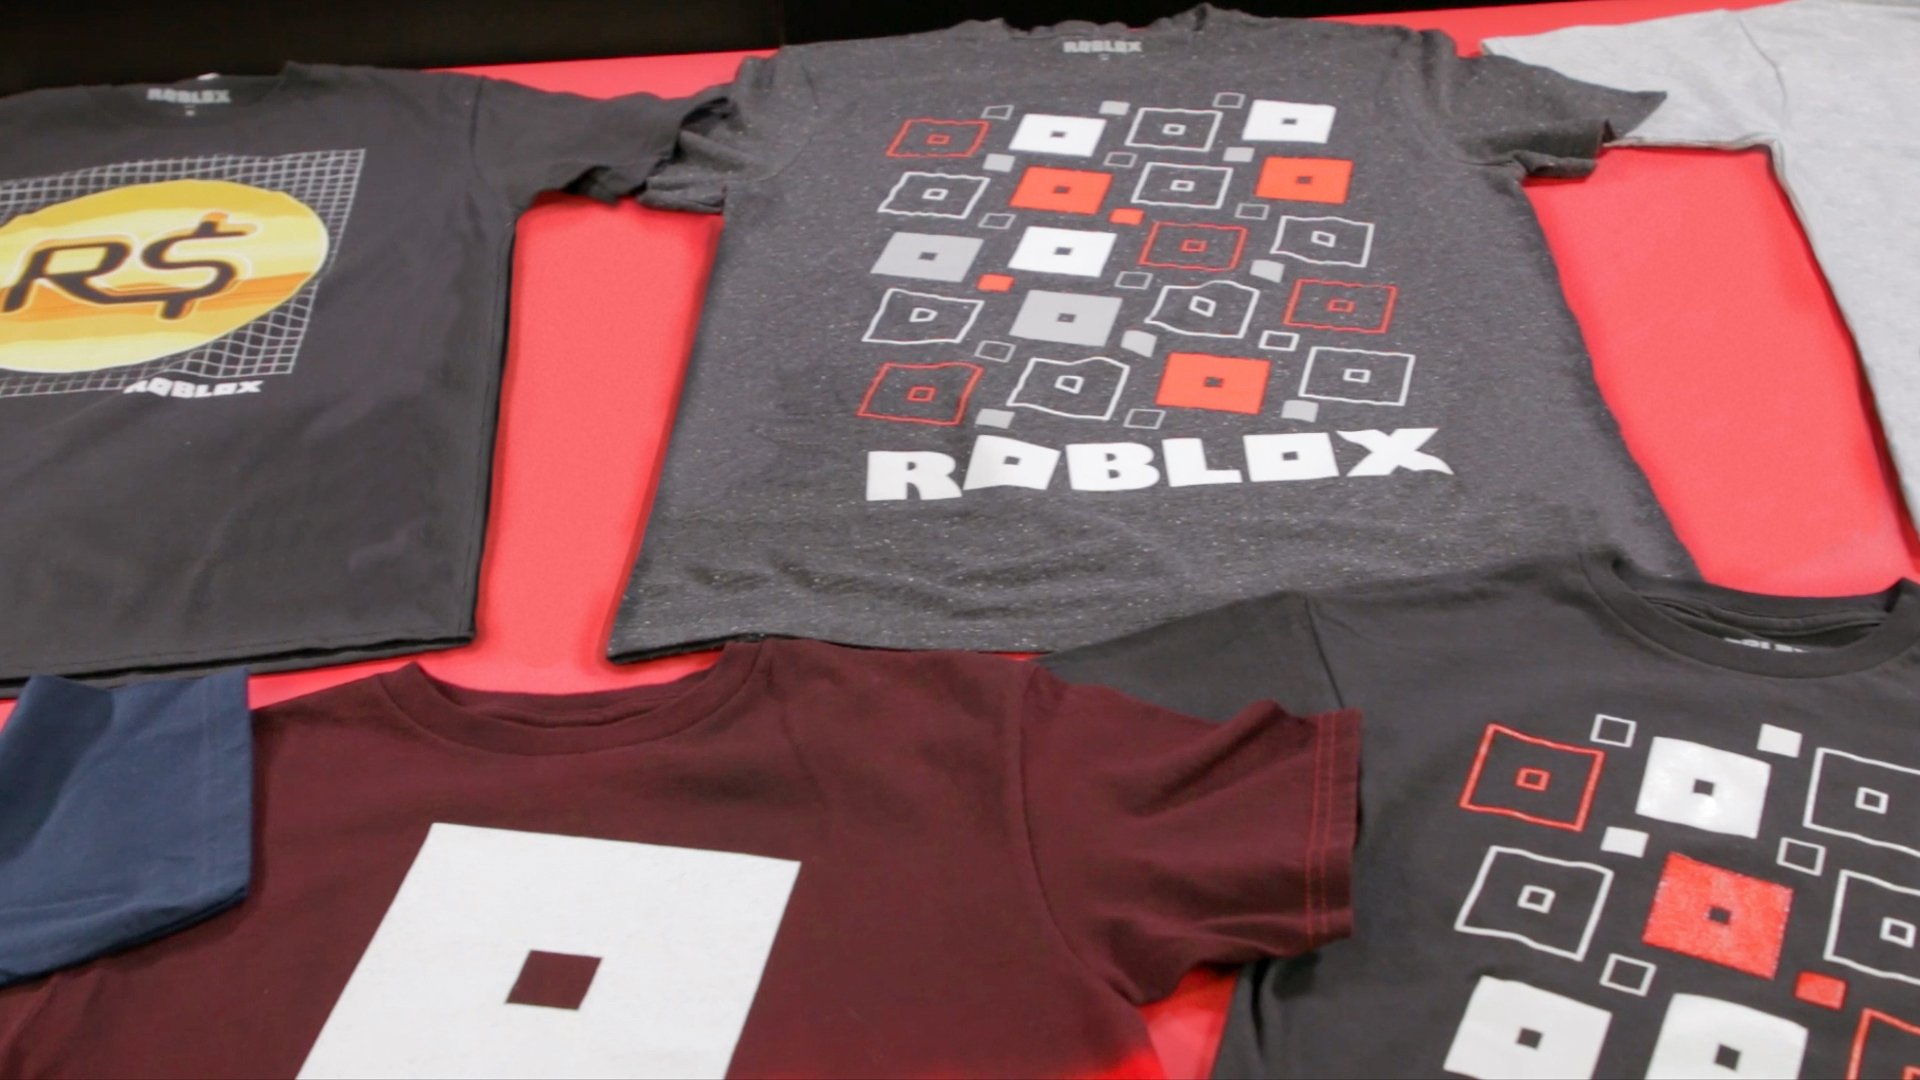 Roblox On Twitter Roblox And Bioworldmerch Are Creating New Roblox Apparel Coming Soon To Kohls Nationwide Read More Https T Co Vvuatdcj31 Https T Co Qechq5josm - rs t shirt roblox